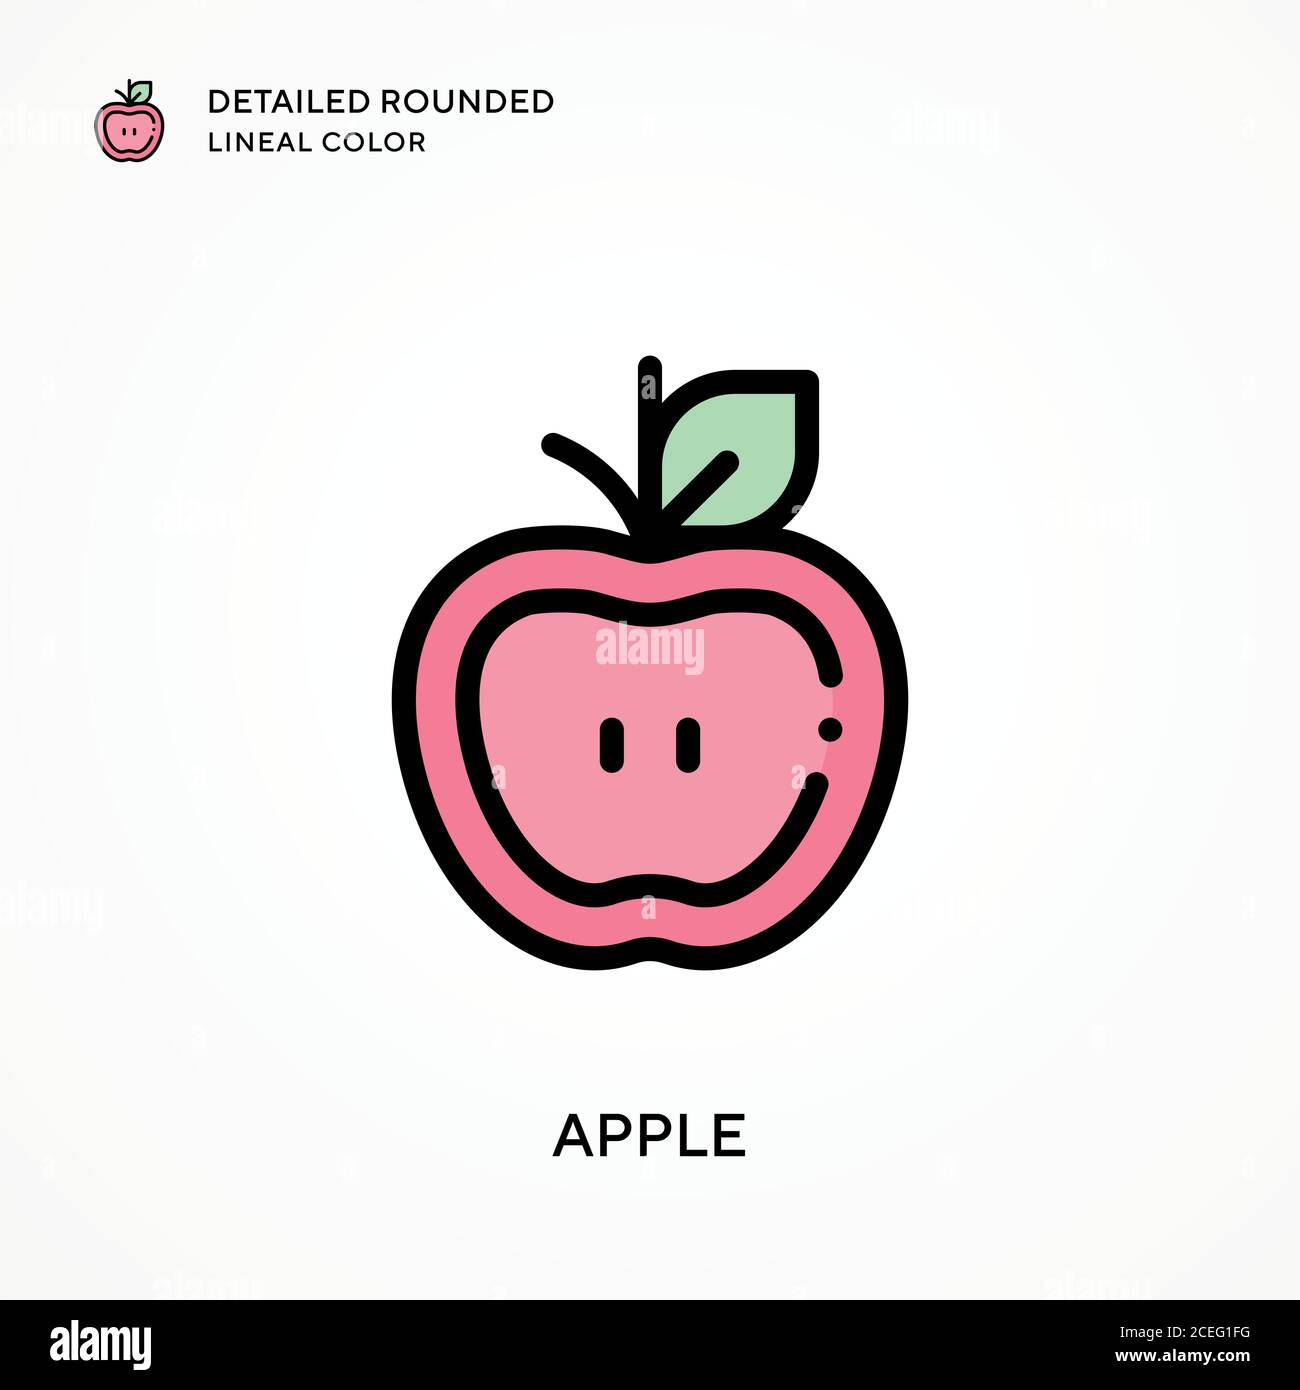 Apple Detailed Rounded Lineal Color Modern Vector Illustration Concepts Easy To Edit And Customize Stock Vector Image Art Alamy